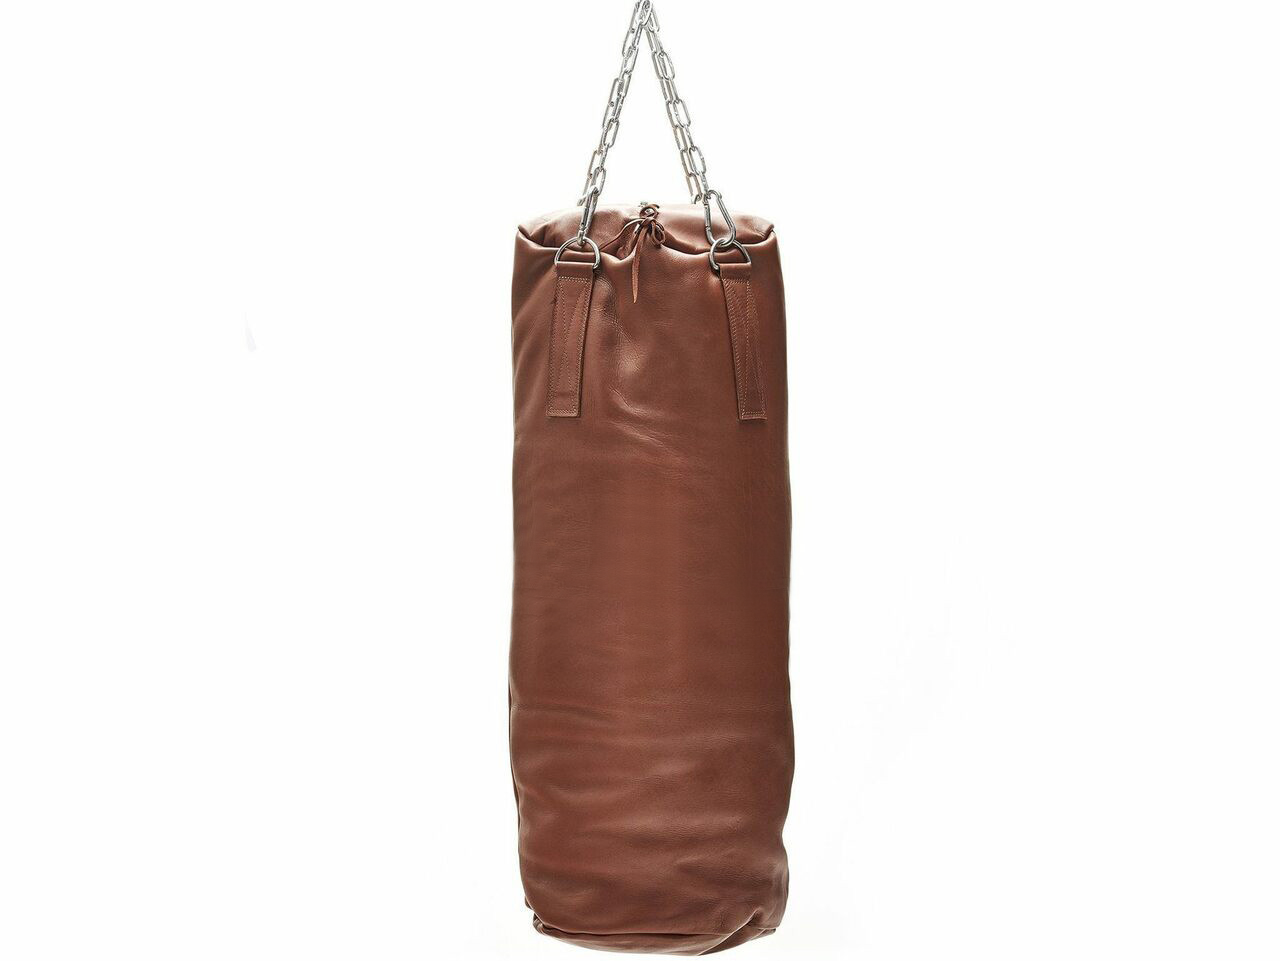 PROLAST RETRO DELUXE TAN LEATHER HEAVY PUNCHING BAG - PROLAST